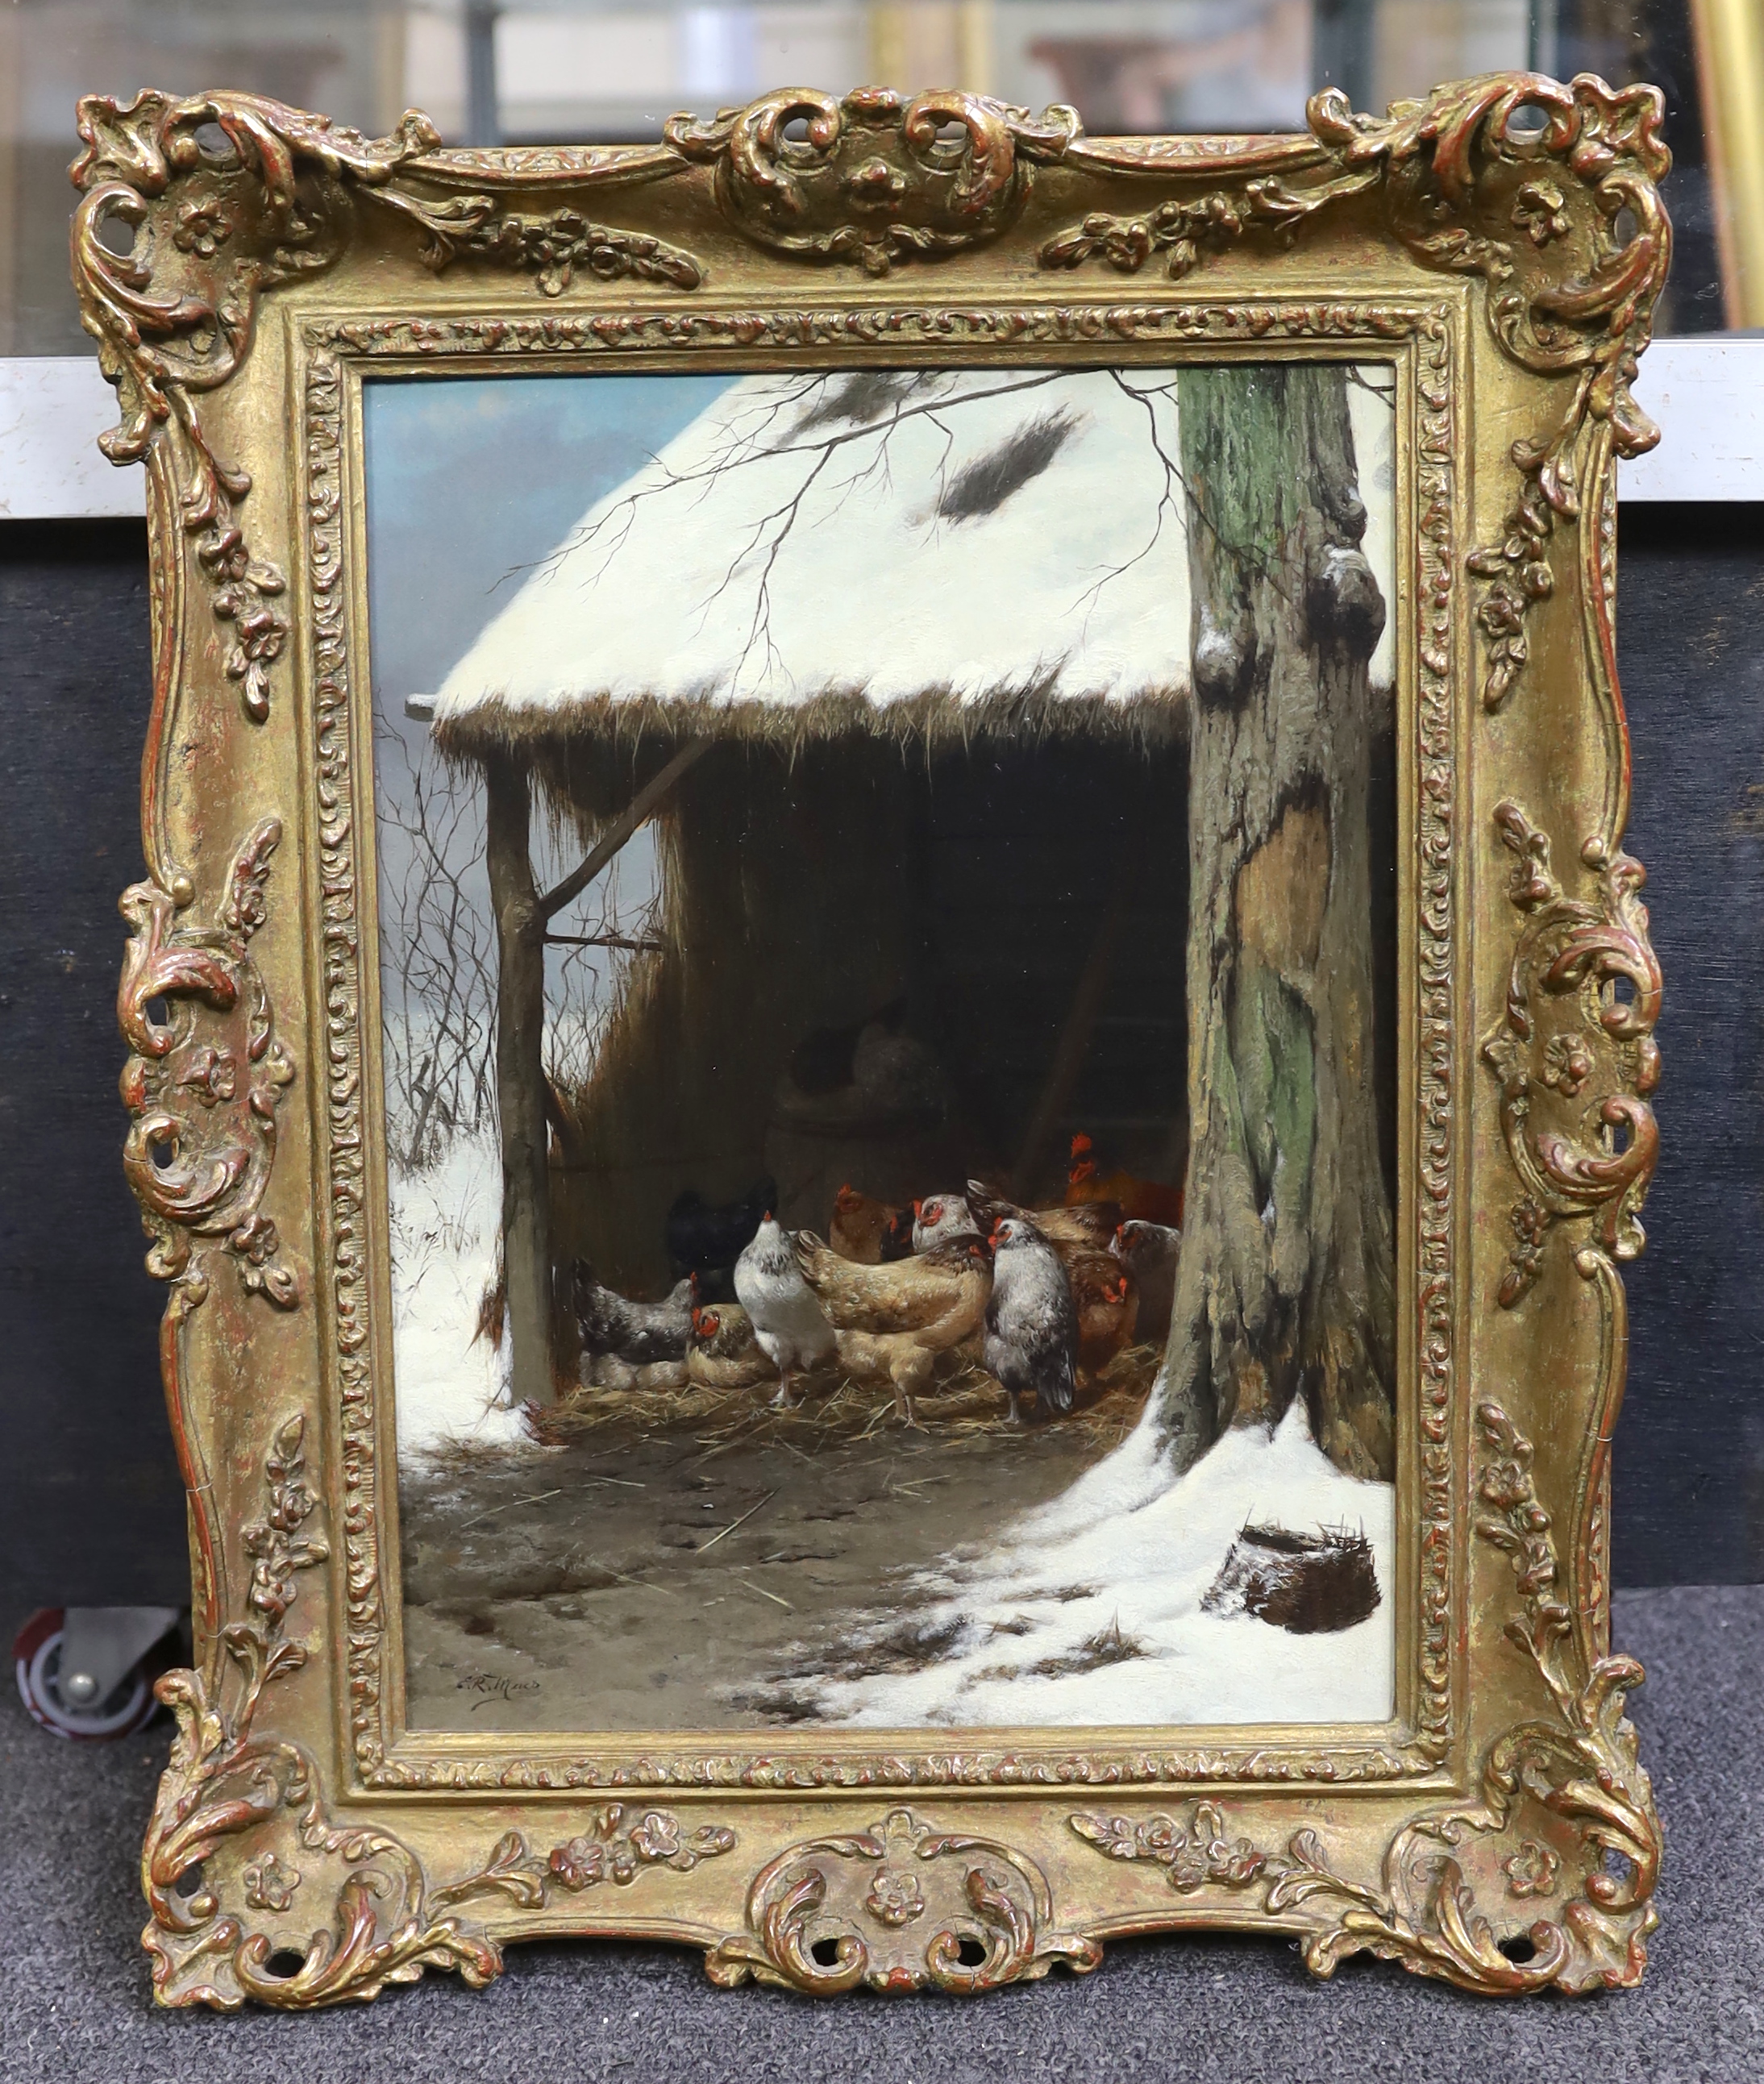 Eugene Remy Maes (Belgian, 1849-1931), Chickens sheltering from the snow in winter, oil on panel, 35 x 25.5cm